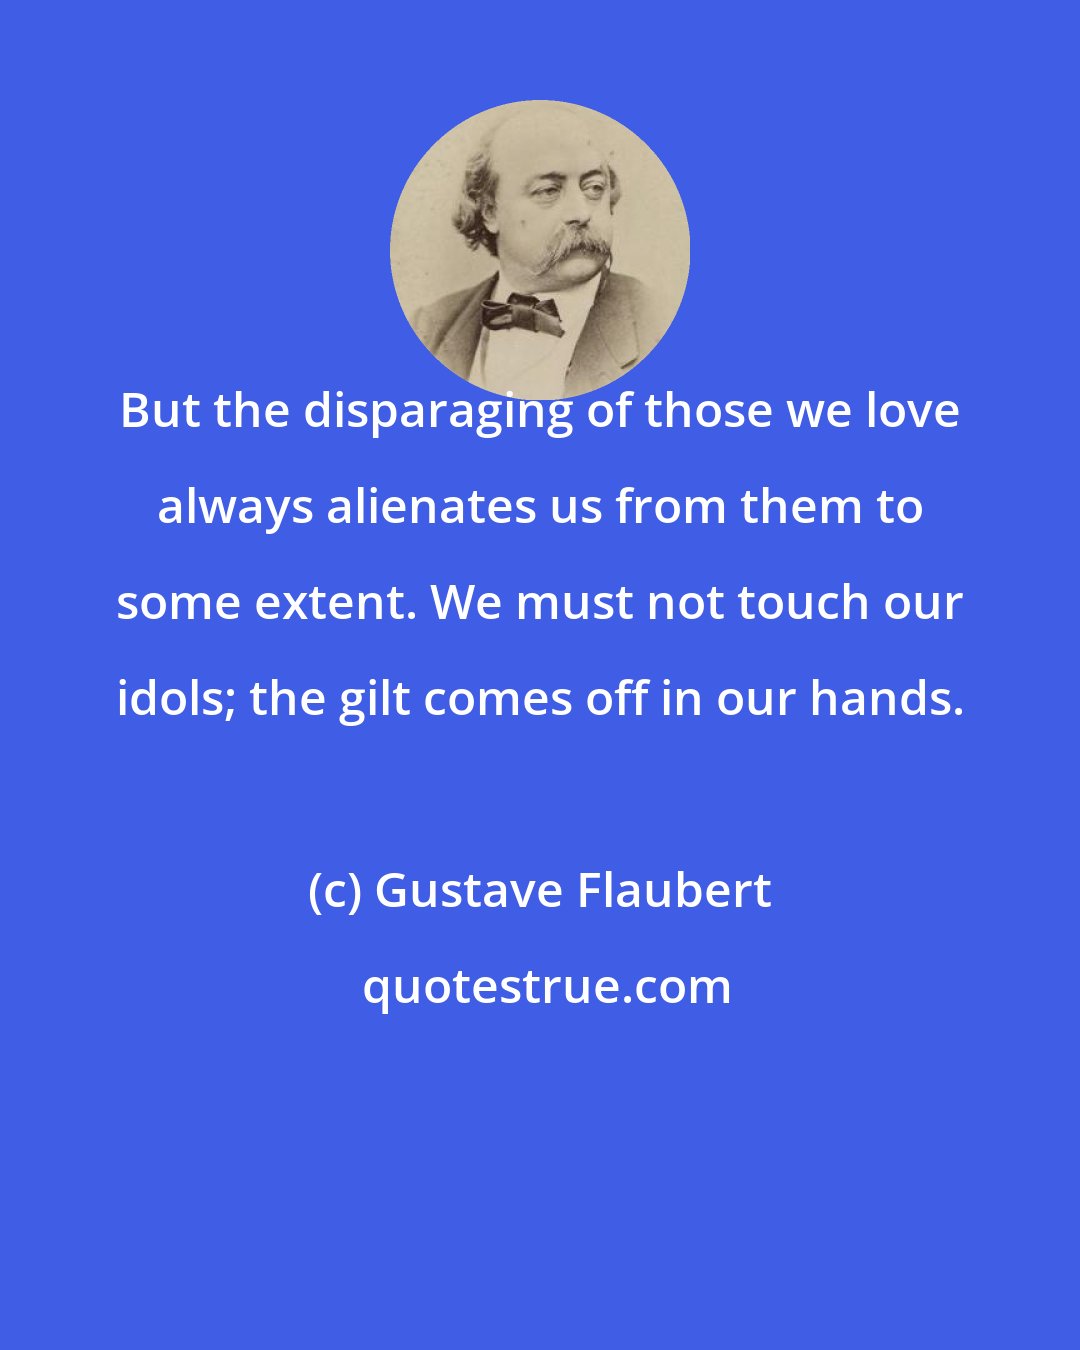 Gustave Flaubert: But the disparaging of those we love always alienates us from them to some extent. We must not touch our idols; the gilt comes off in our hands.